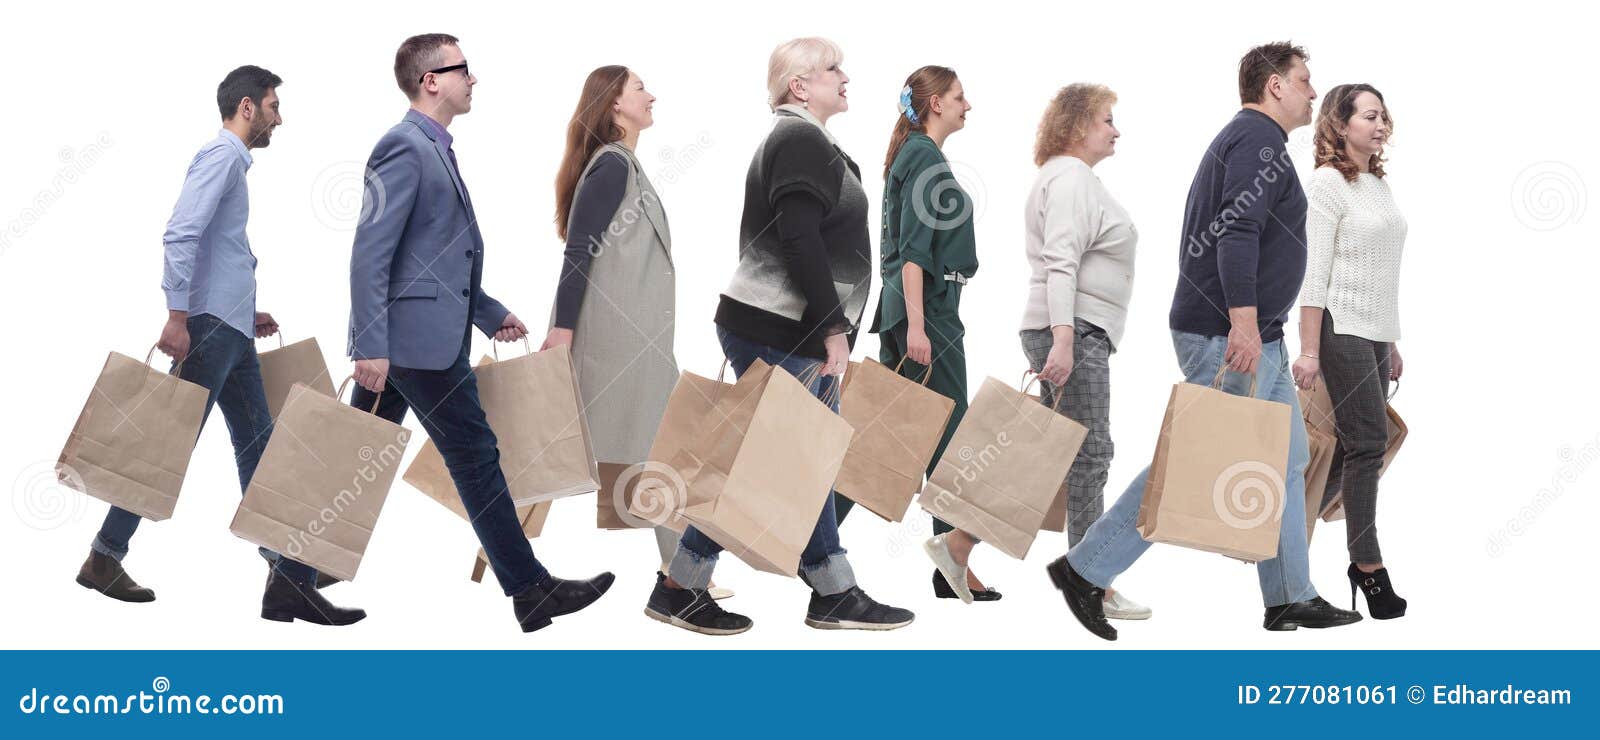 A Group of People are Running Paper Shopping Bags Stock Image - Image ...